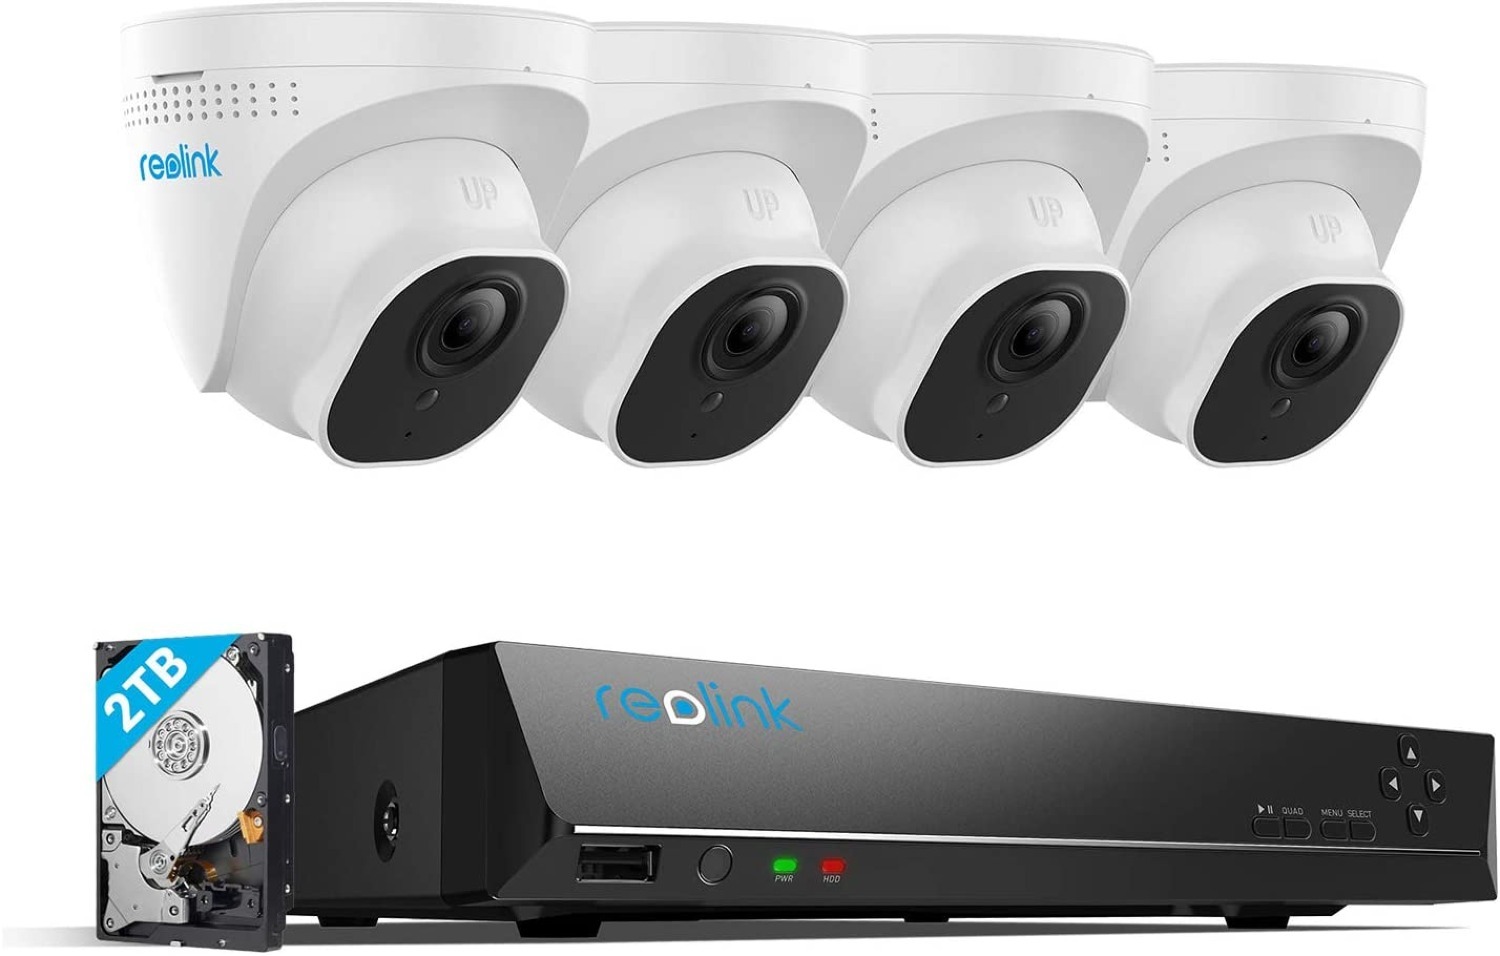 4-Camera 8MP 4K H.265 PoE Security System w/ 3X Optical Zoom & 2TB HDD $458 + Free Shipping